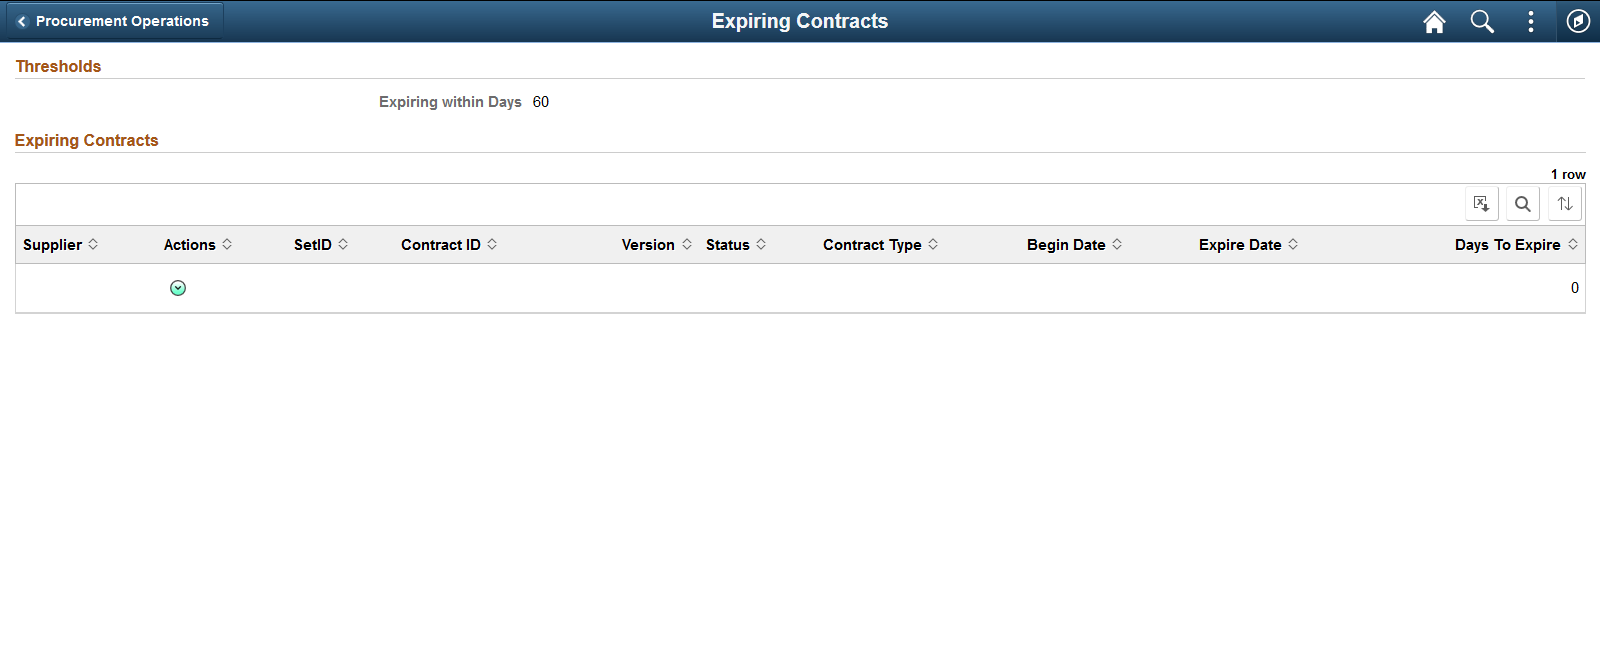 Expiring Contracts Page